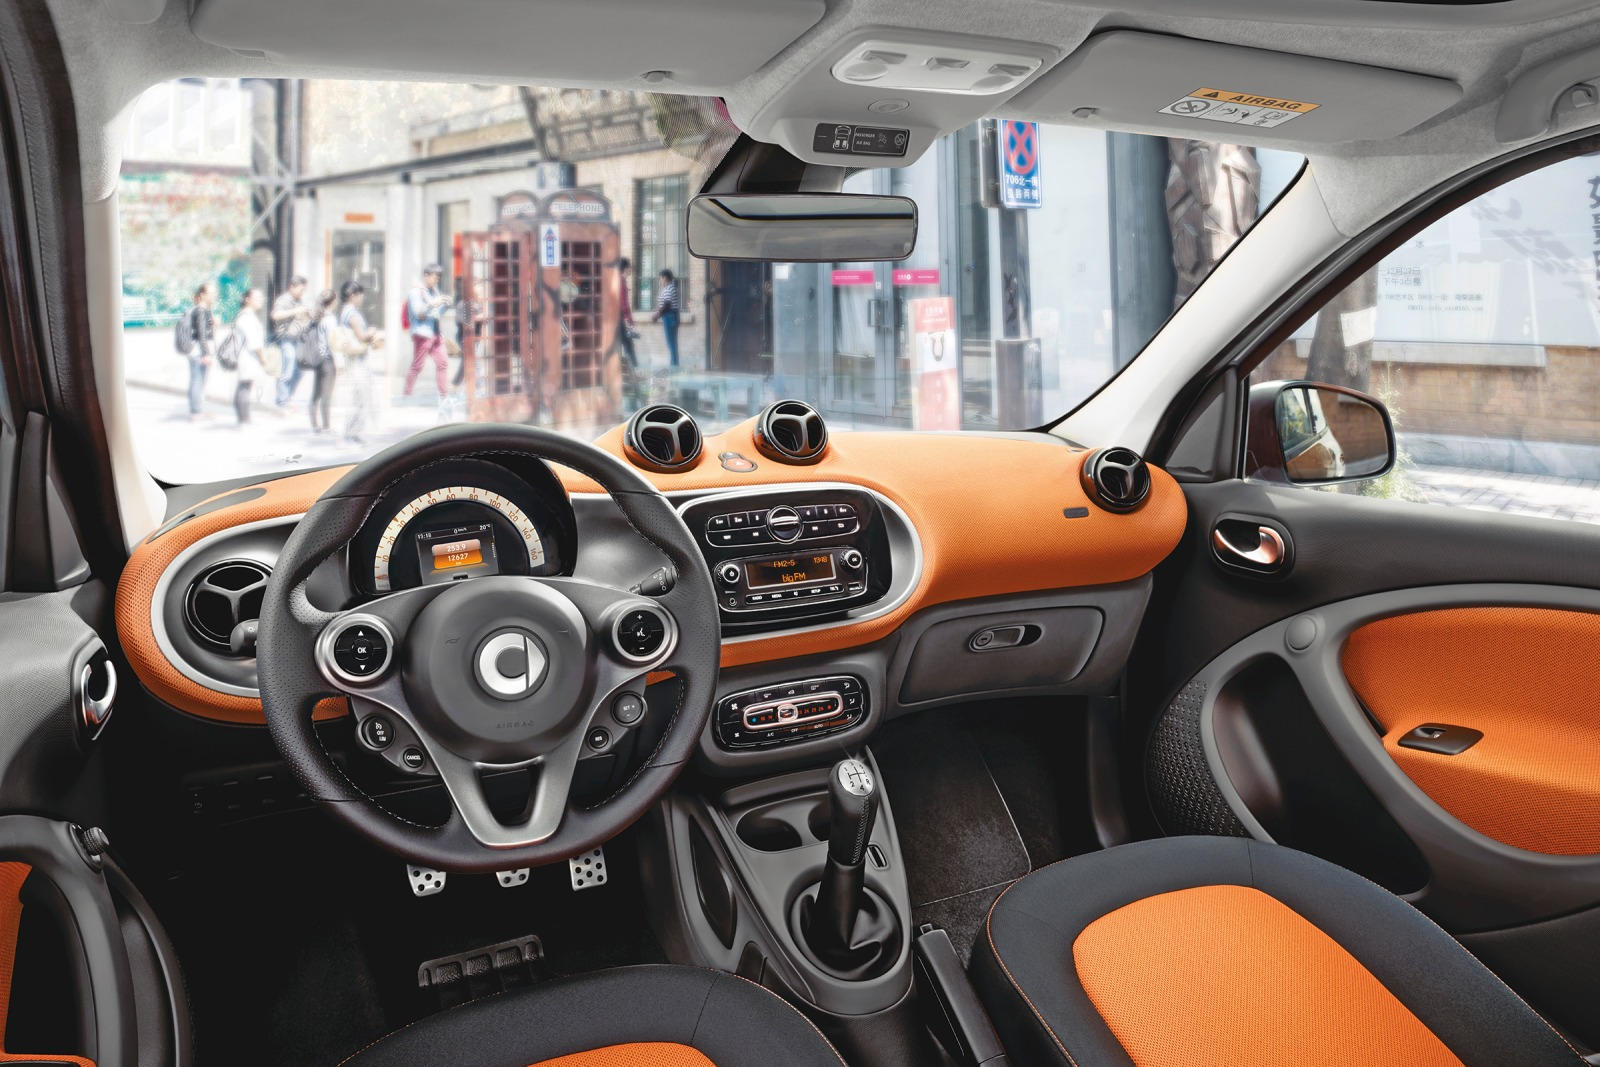 https://cdn.carbuzz.com/gallery-images/2017-smart-fortwo-dashboard-carbuzz-353337-1600.jpg